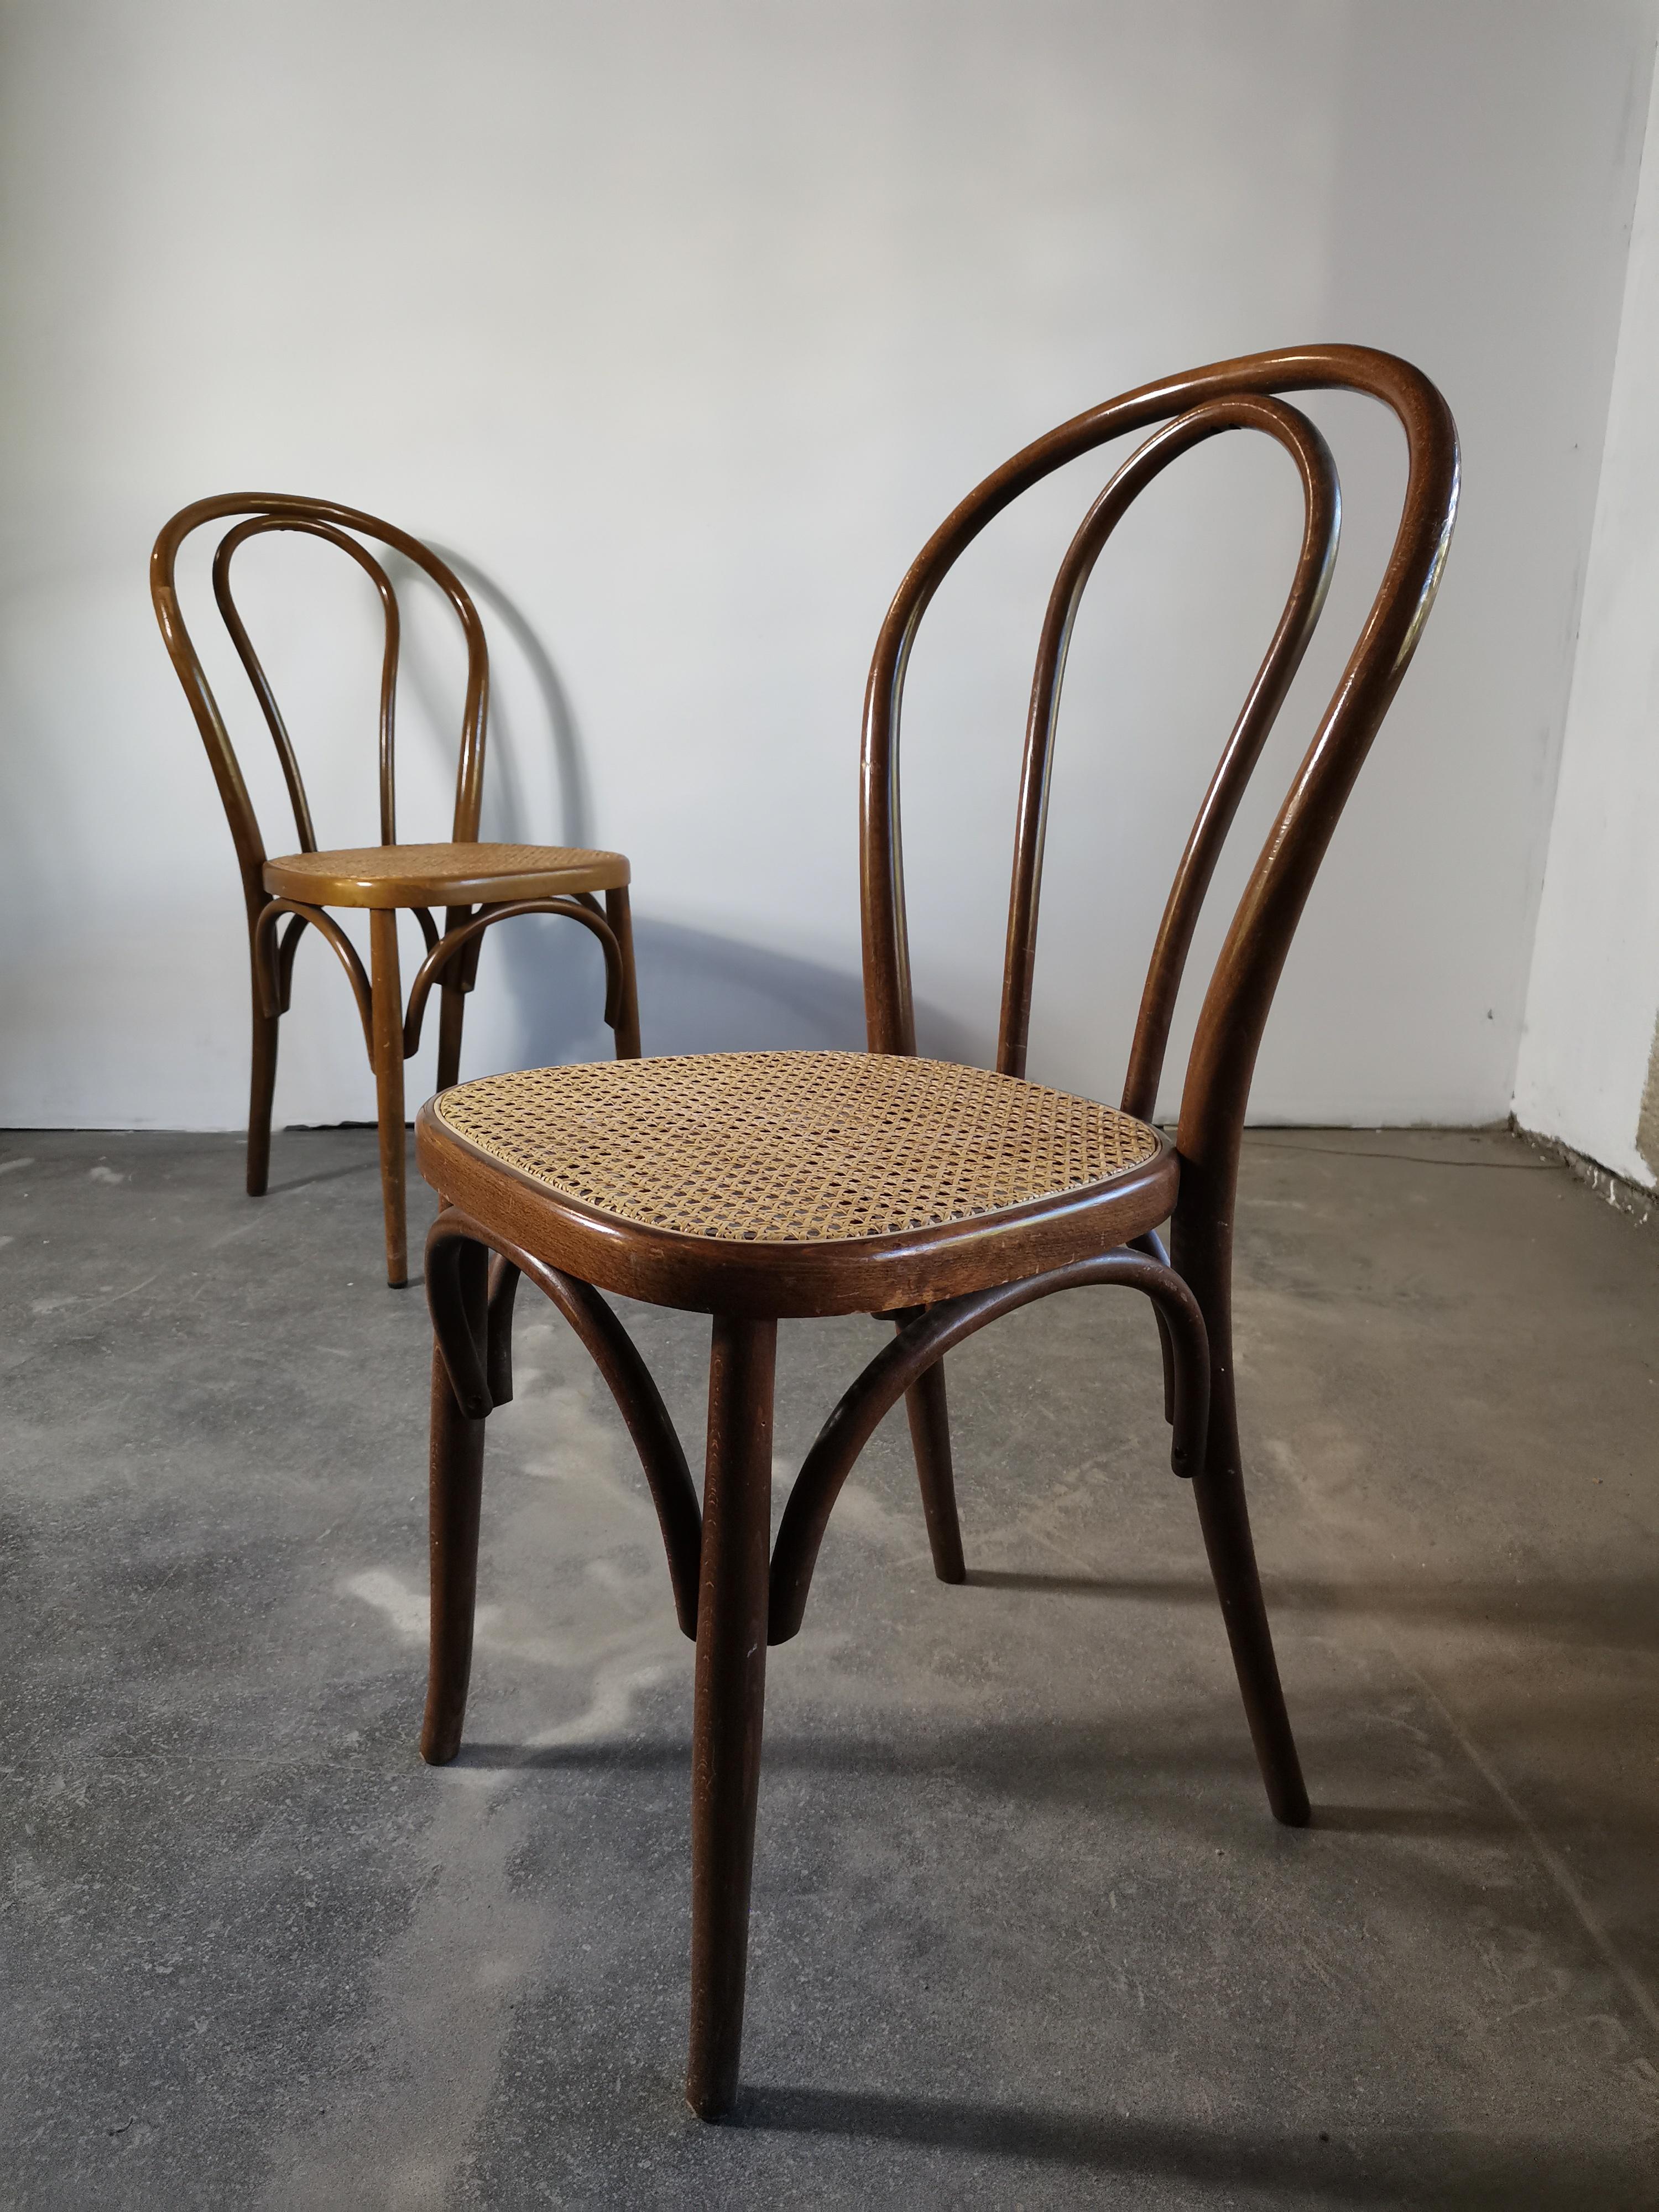 Italian Bentwood No. 18, 1960s 1 of 2 For Sale